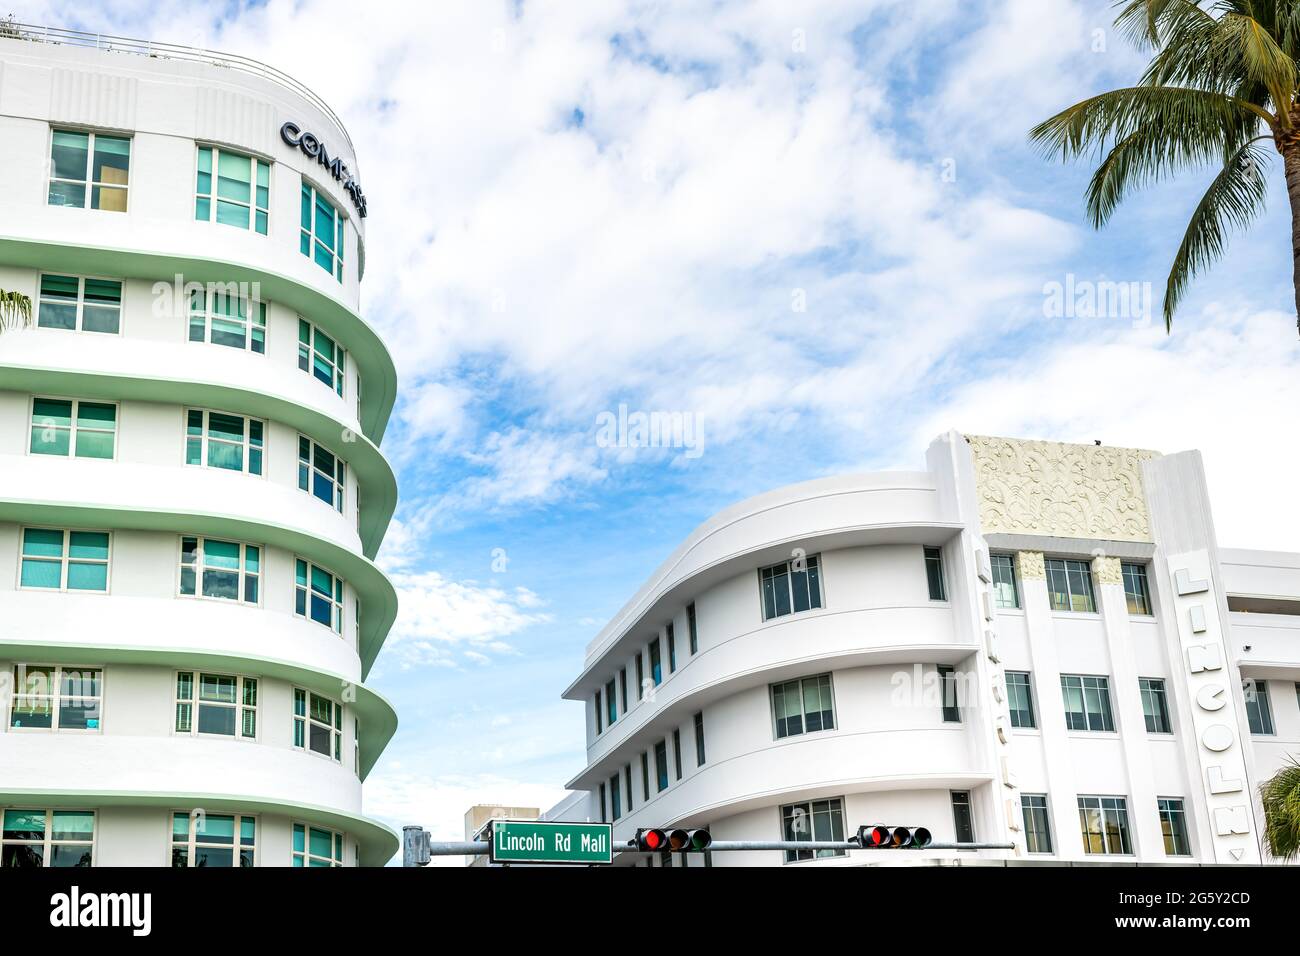 Miami Beach, USA - January 17, 2021: Lincoln road famous shopping street with sign for Compass real estate and theater art deco architecture and nobod Stock Photo